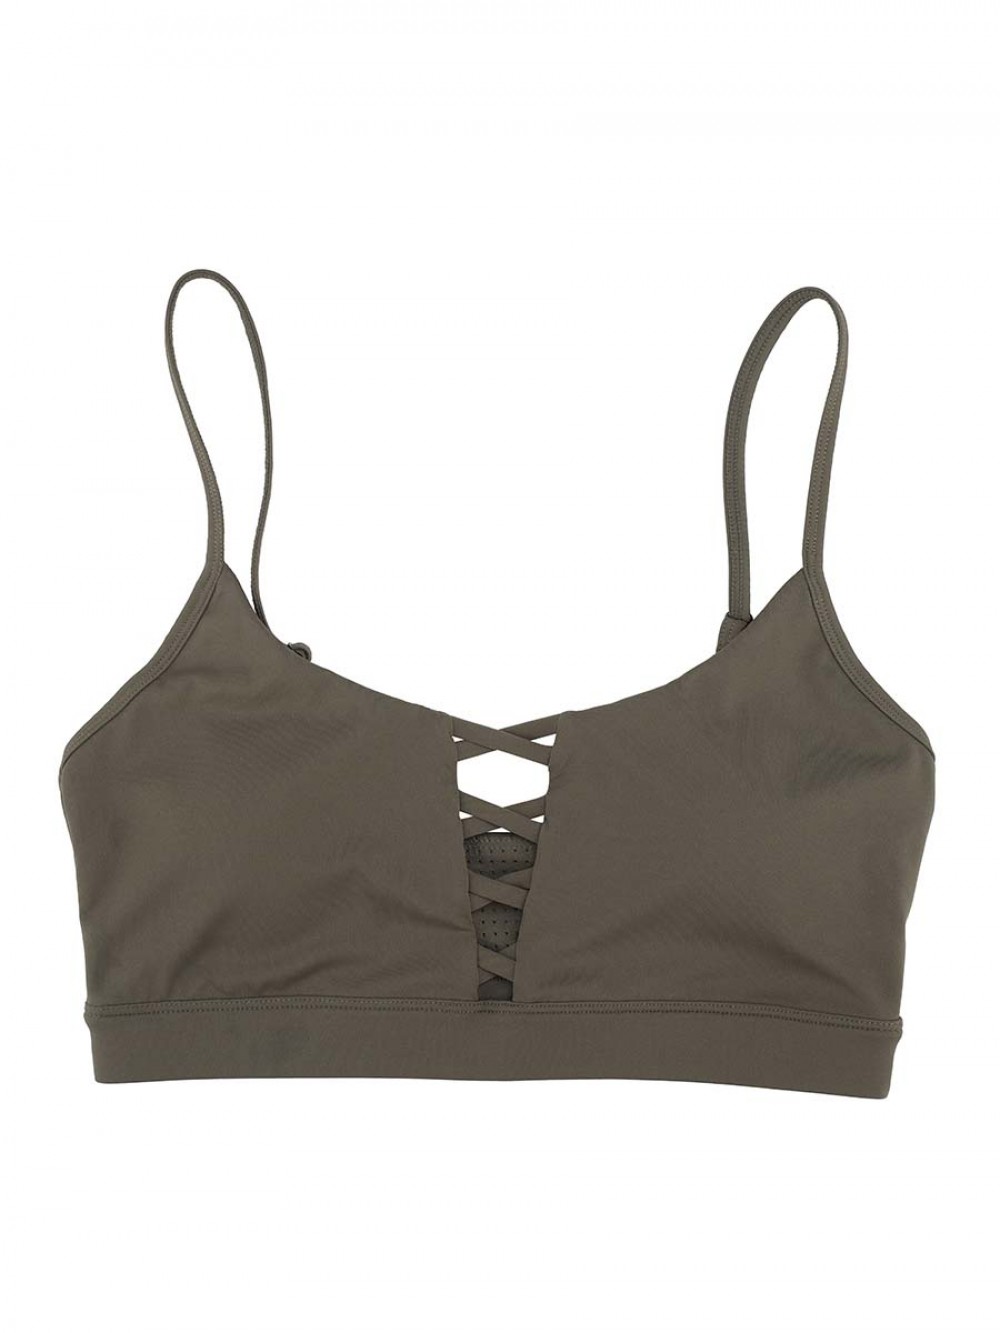 2022 New Listing Hollow Out Design Women Fitness Yoga Bra